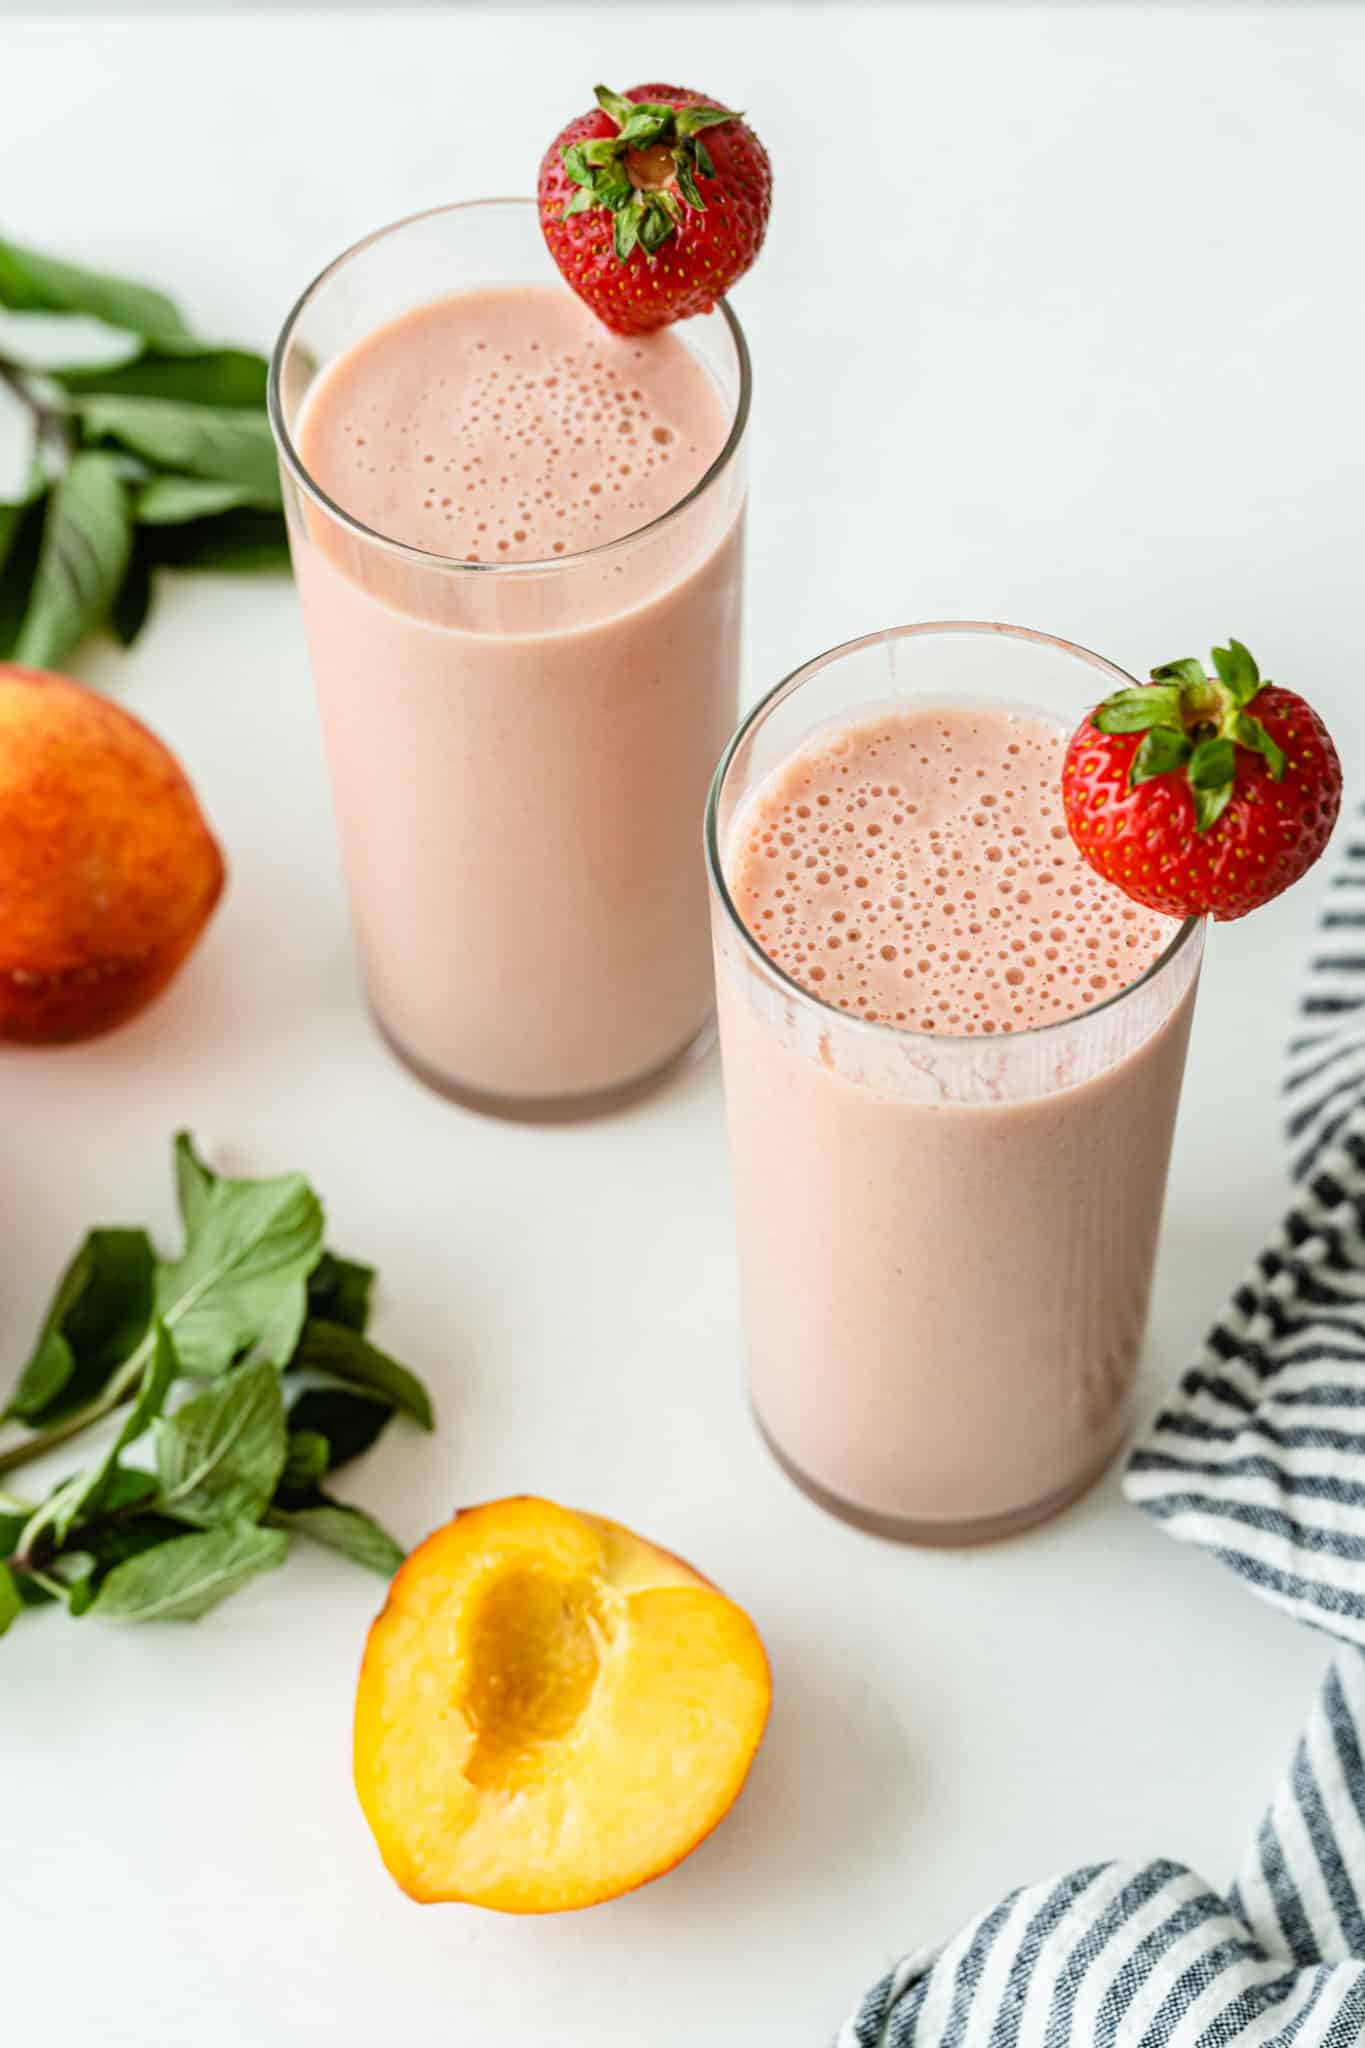 two glasses of strawberry peach smoothies garnished with strawberries.